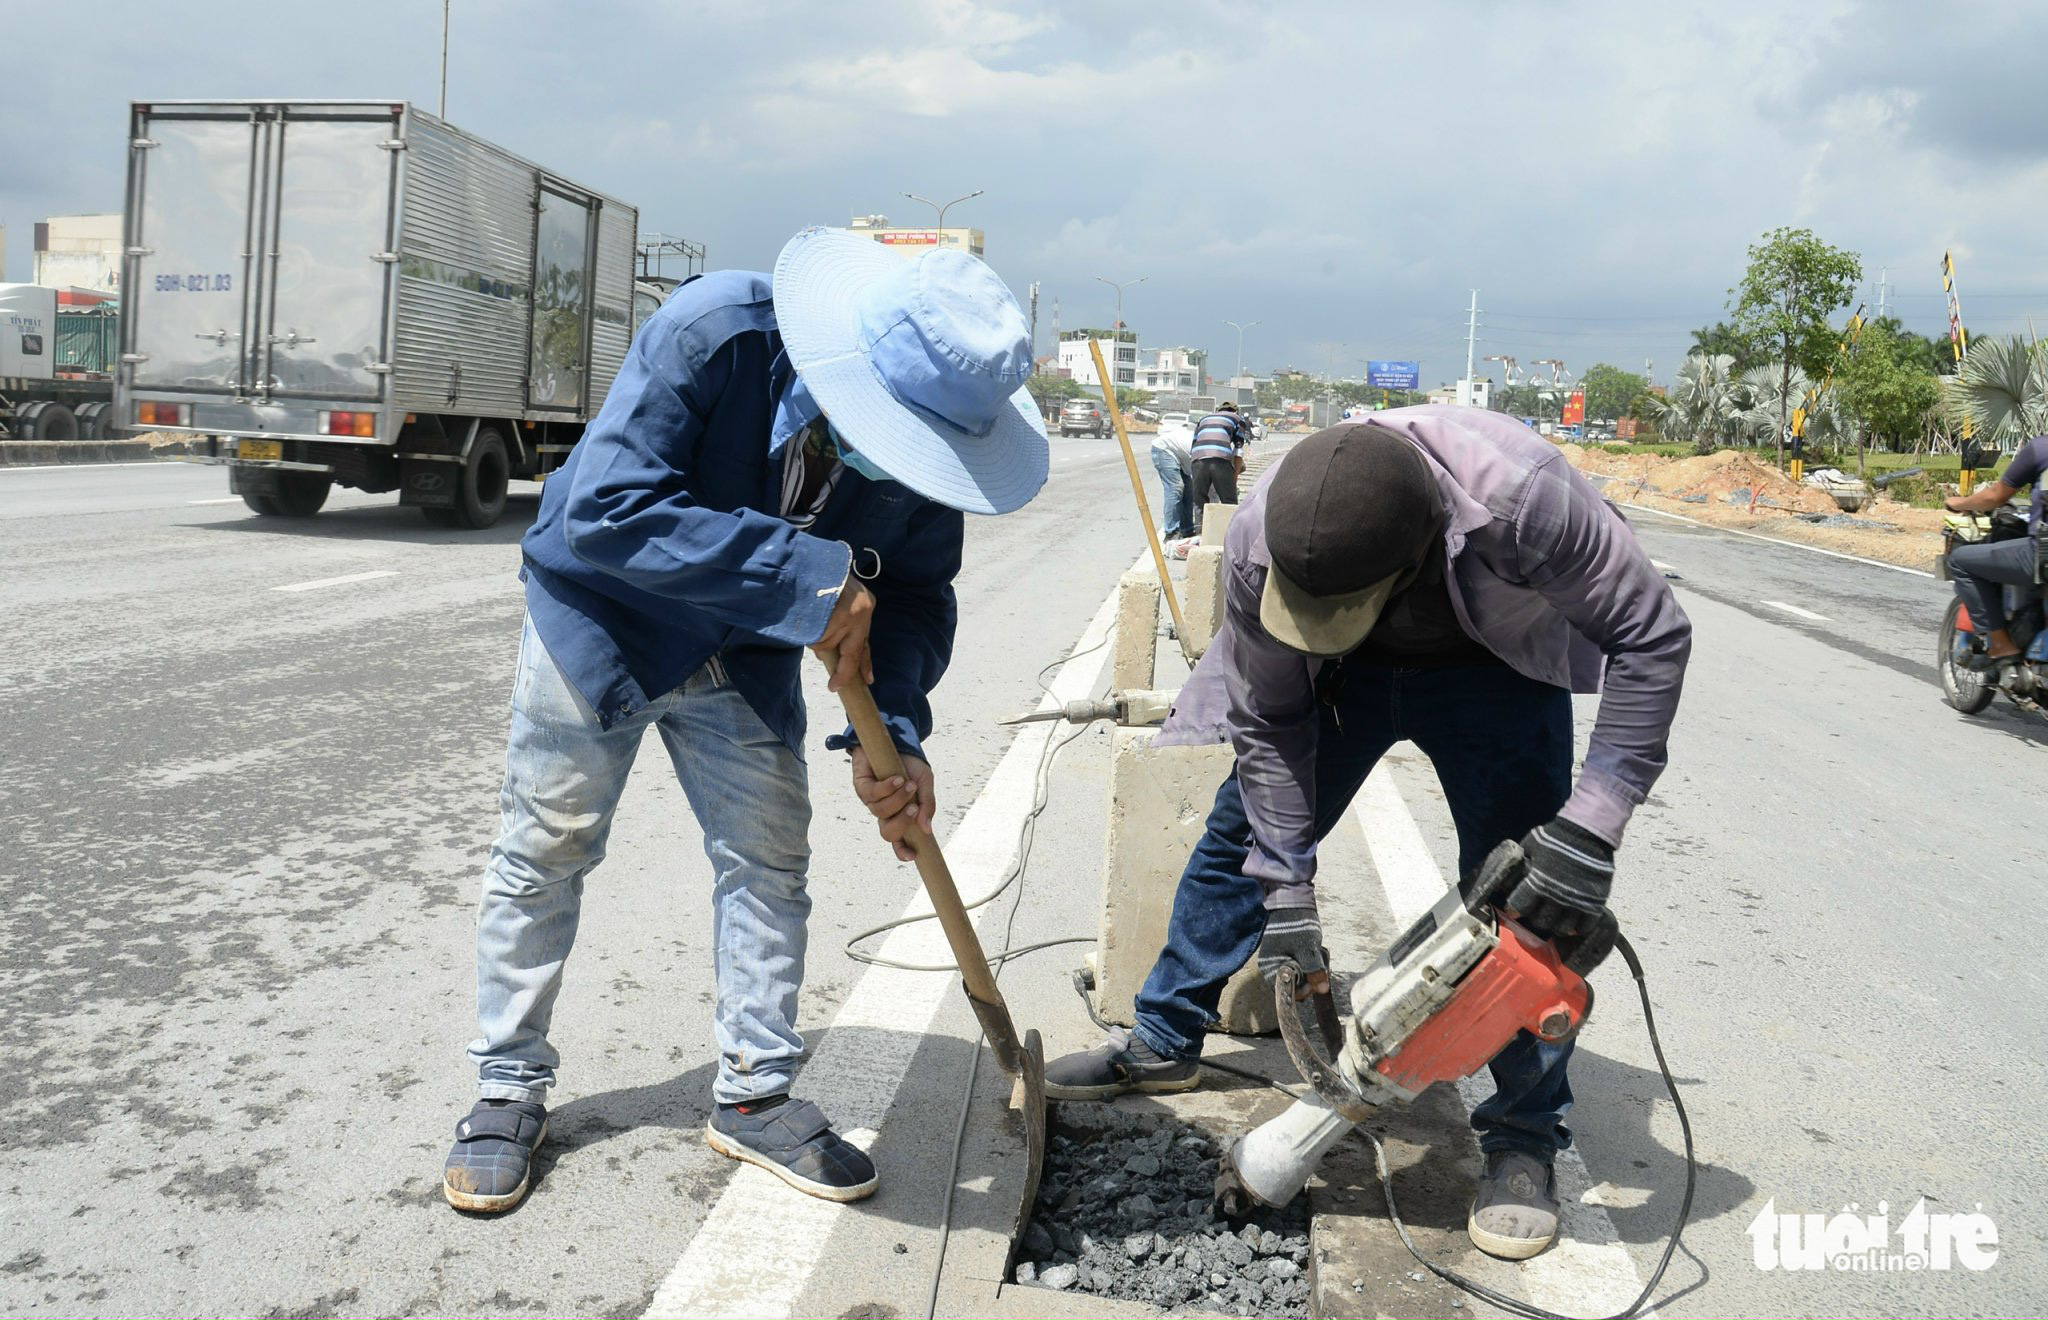 Workers work at the expansion project of Nguyen Van Linh Avenue in District 7, Ho Chi Minh City. Photo: Tu Trung / Tuoi Tre